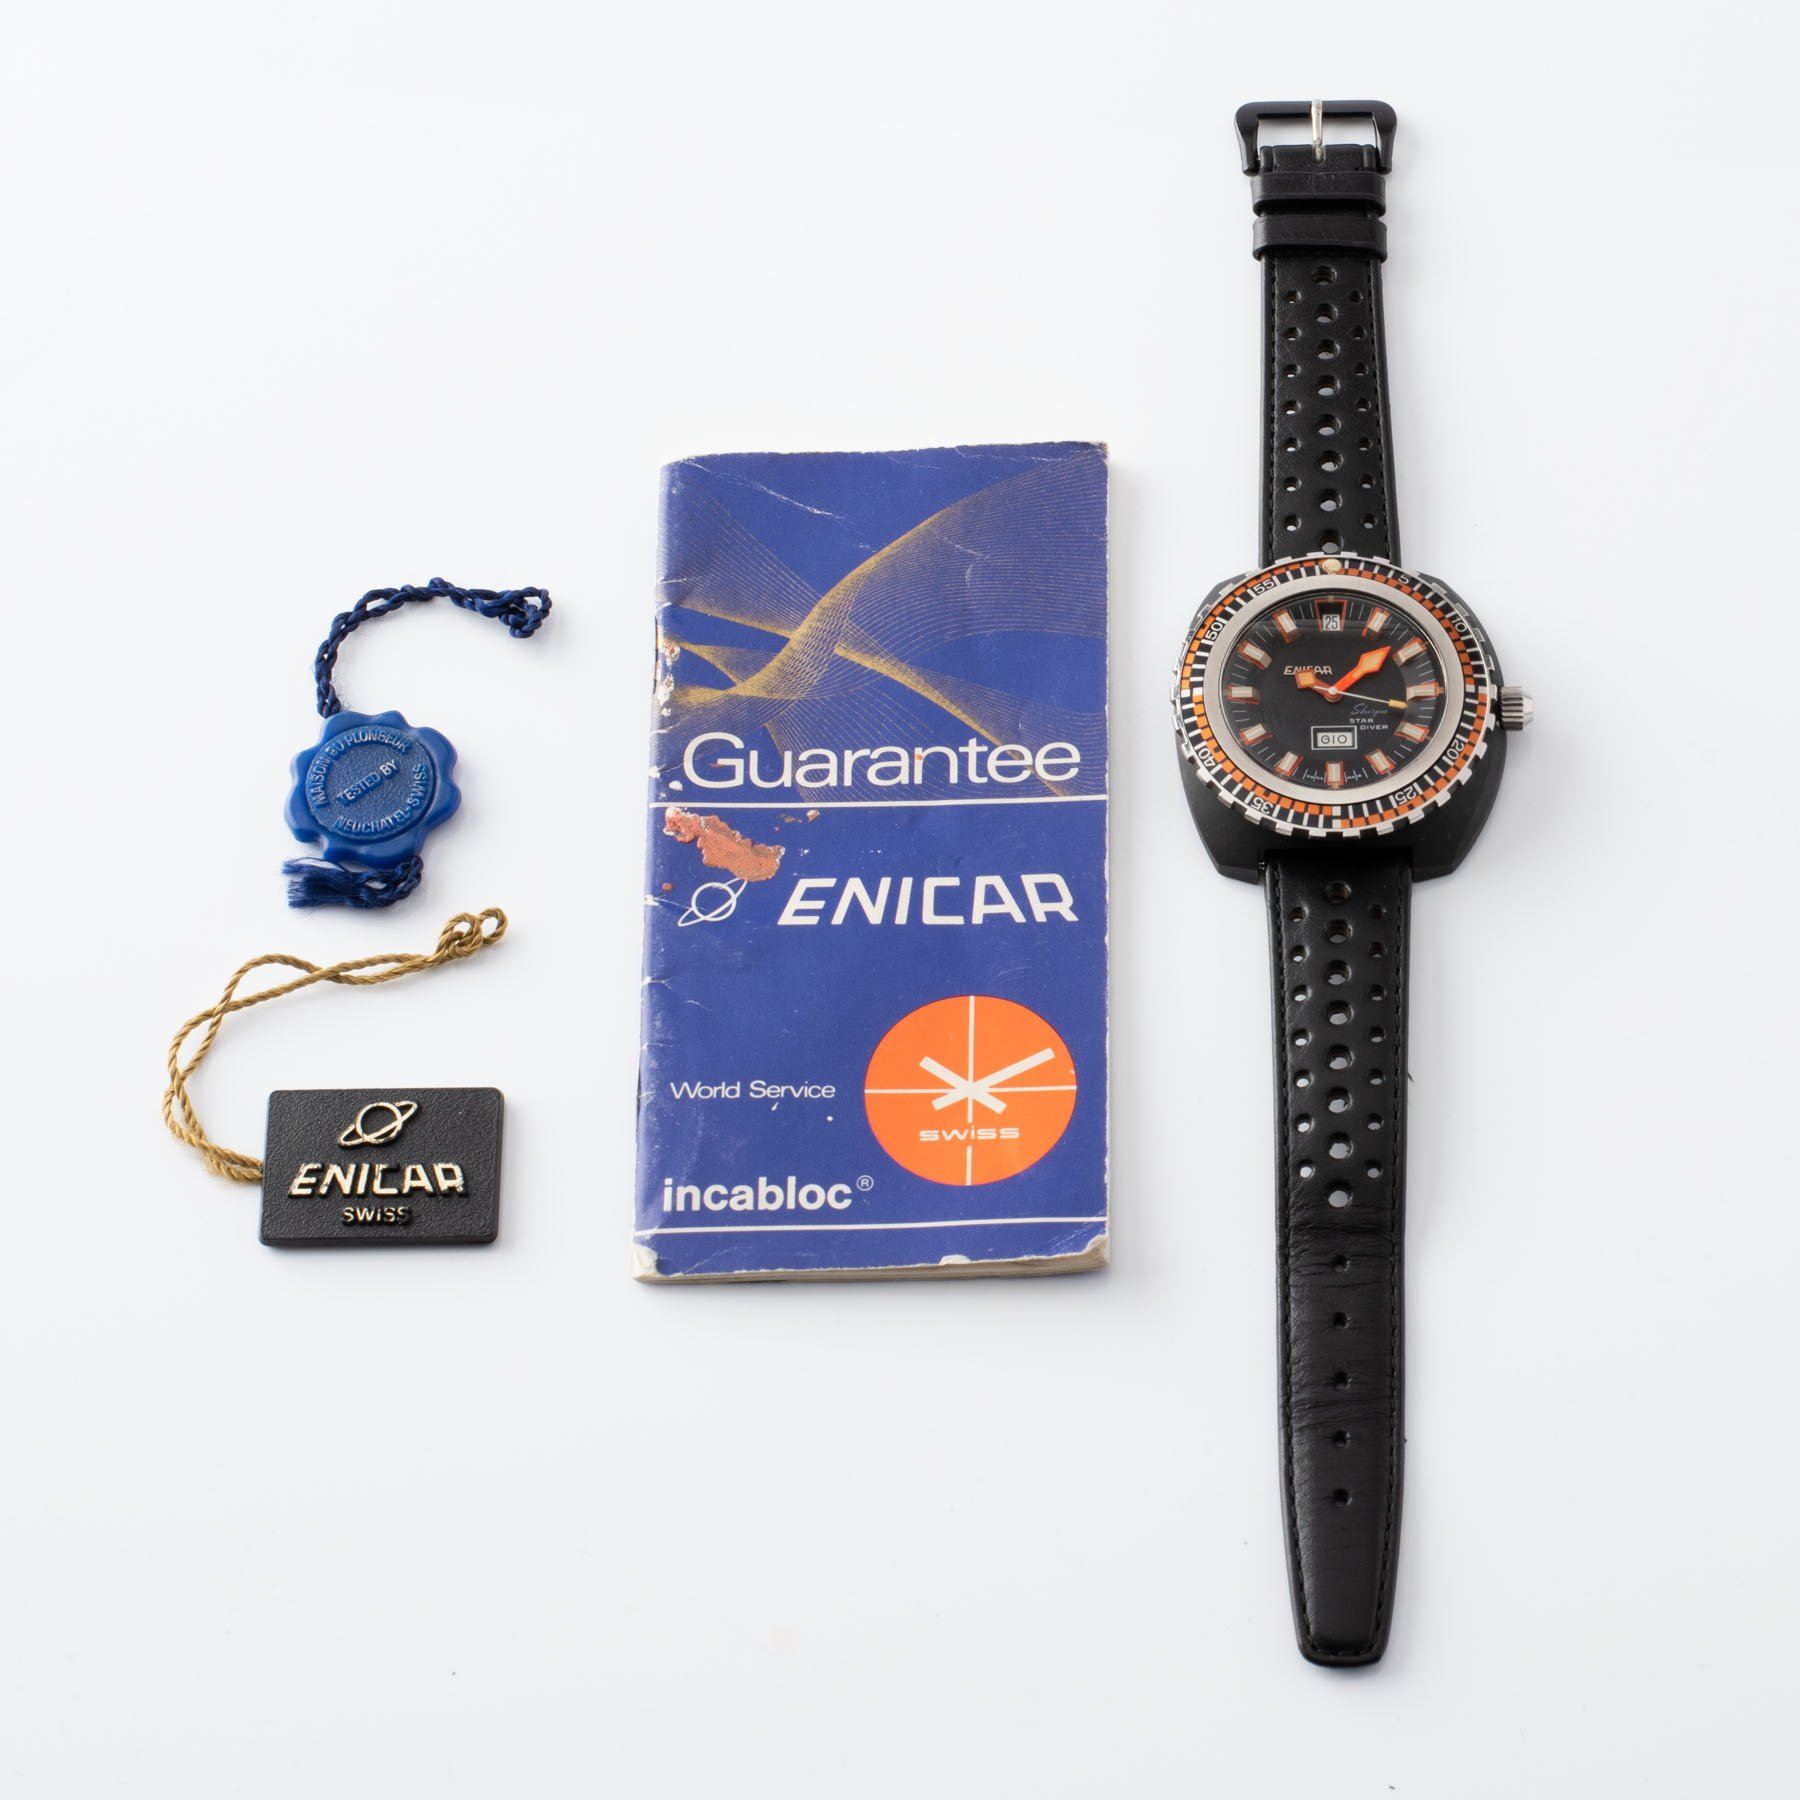 Enicar Sherpa Star Diver 147-05-02 with Guarantee and hangtags